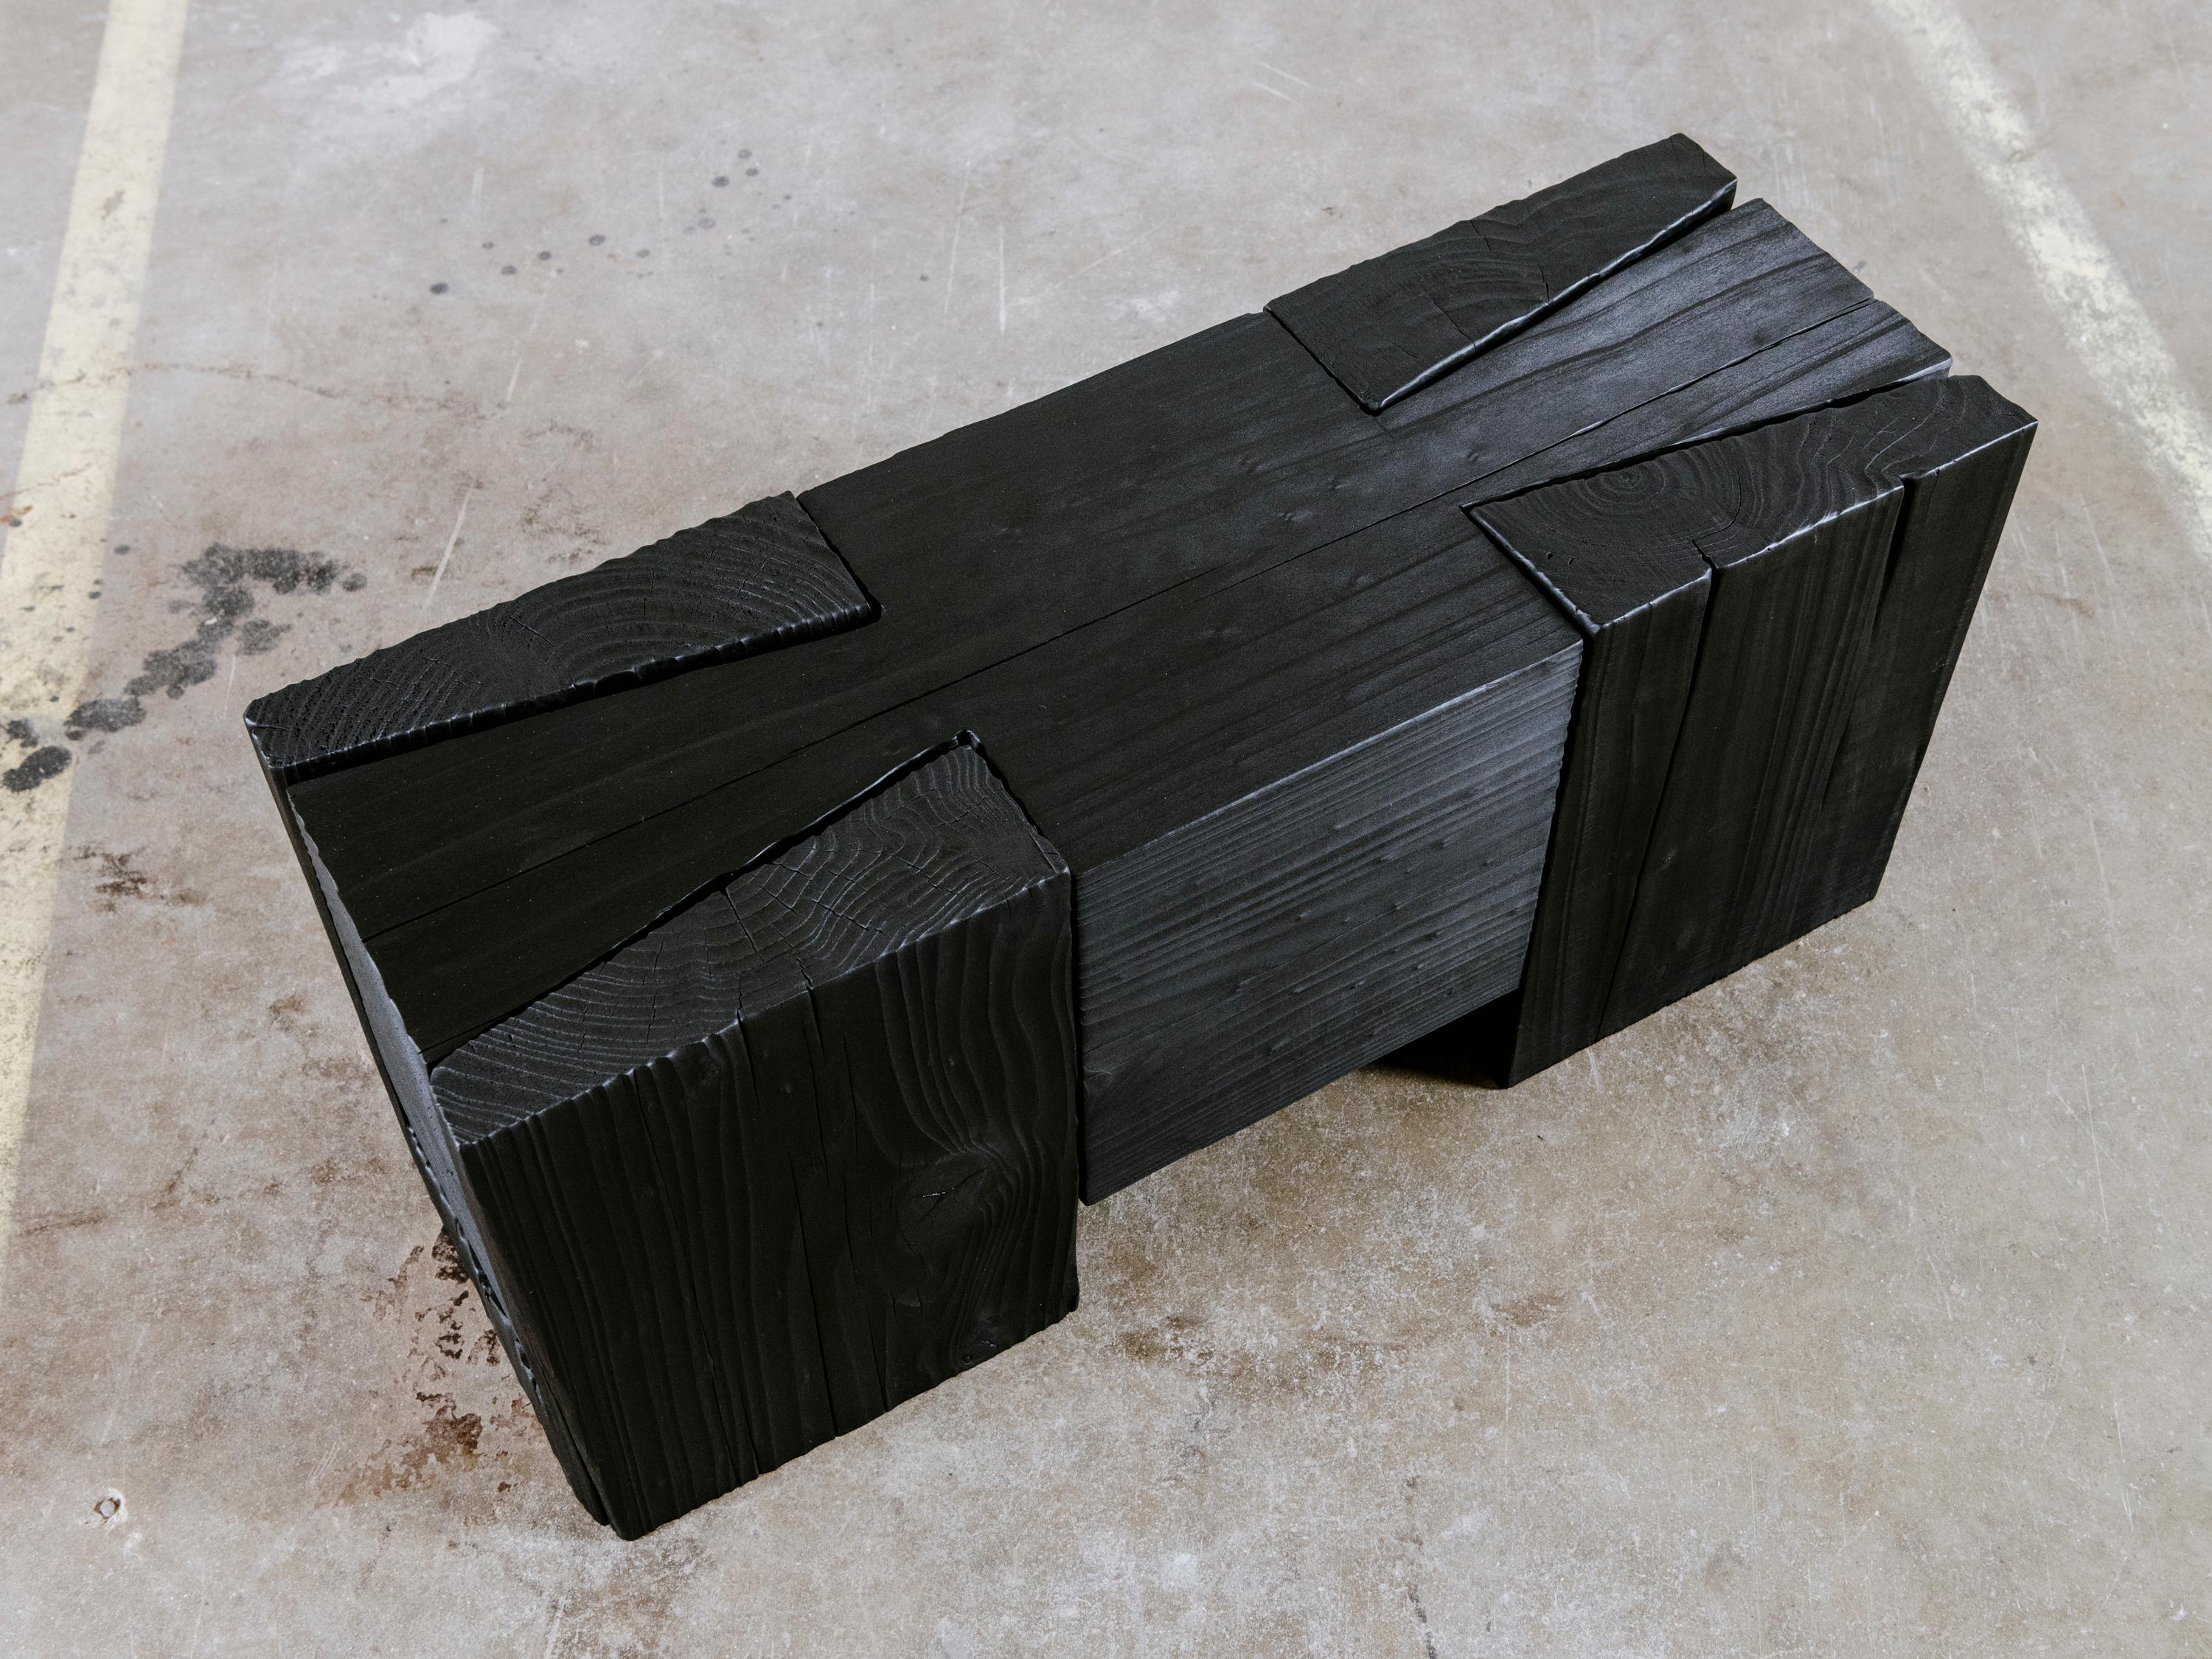 American Unique Blackened Redwood Bench/Coffee Table by Base 10